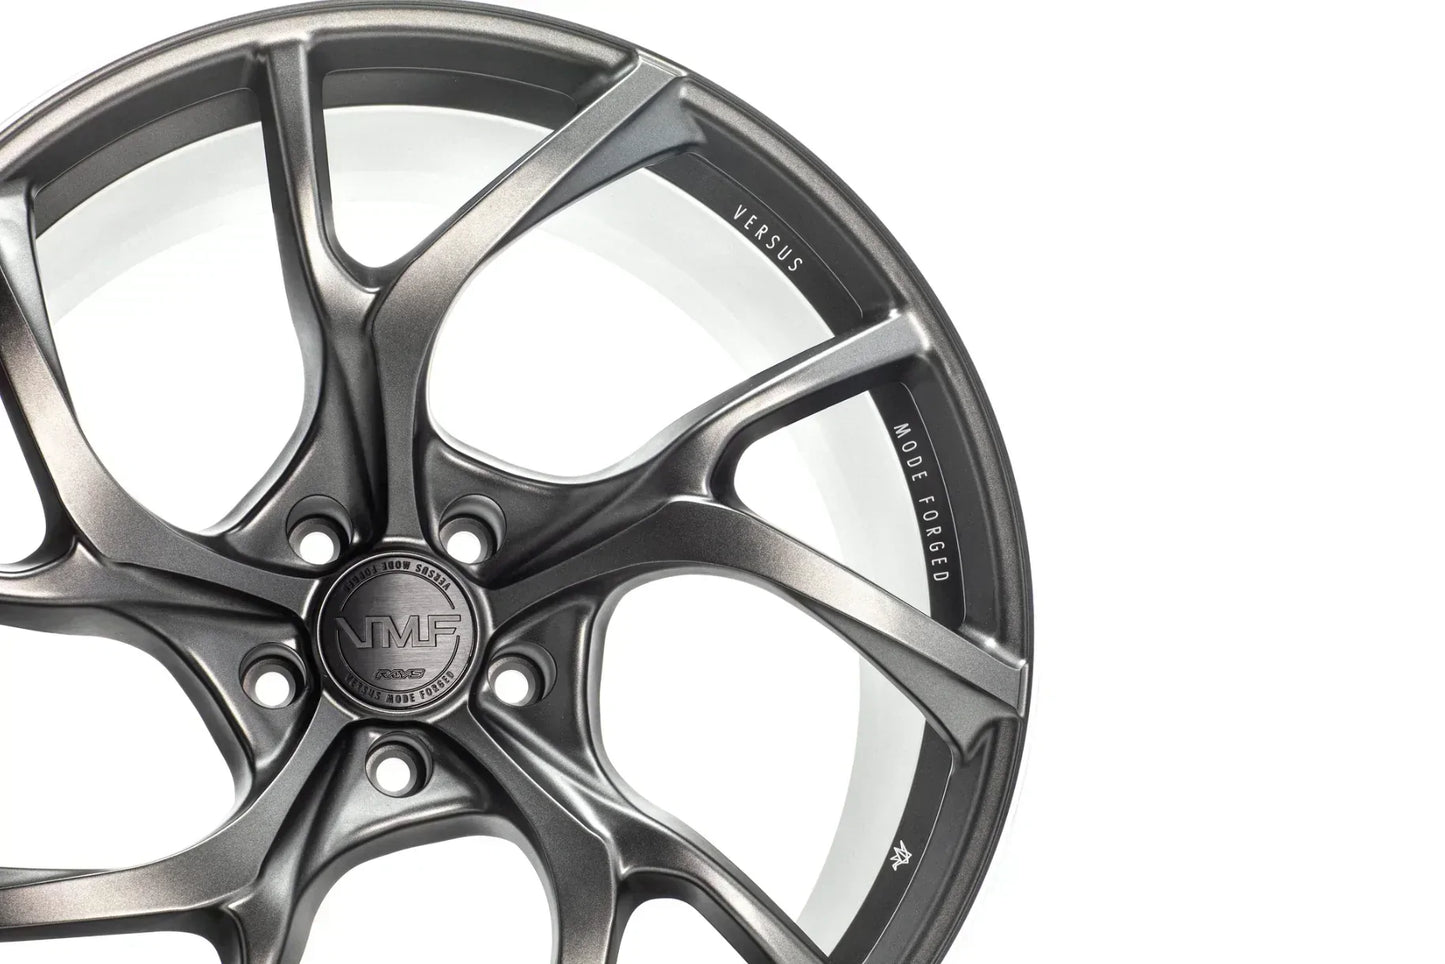 Versus Mode Forged (VMF) C-01 19x10.5 | 5x114.3 – 365 Performance Plus